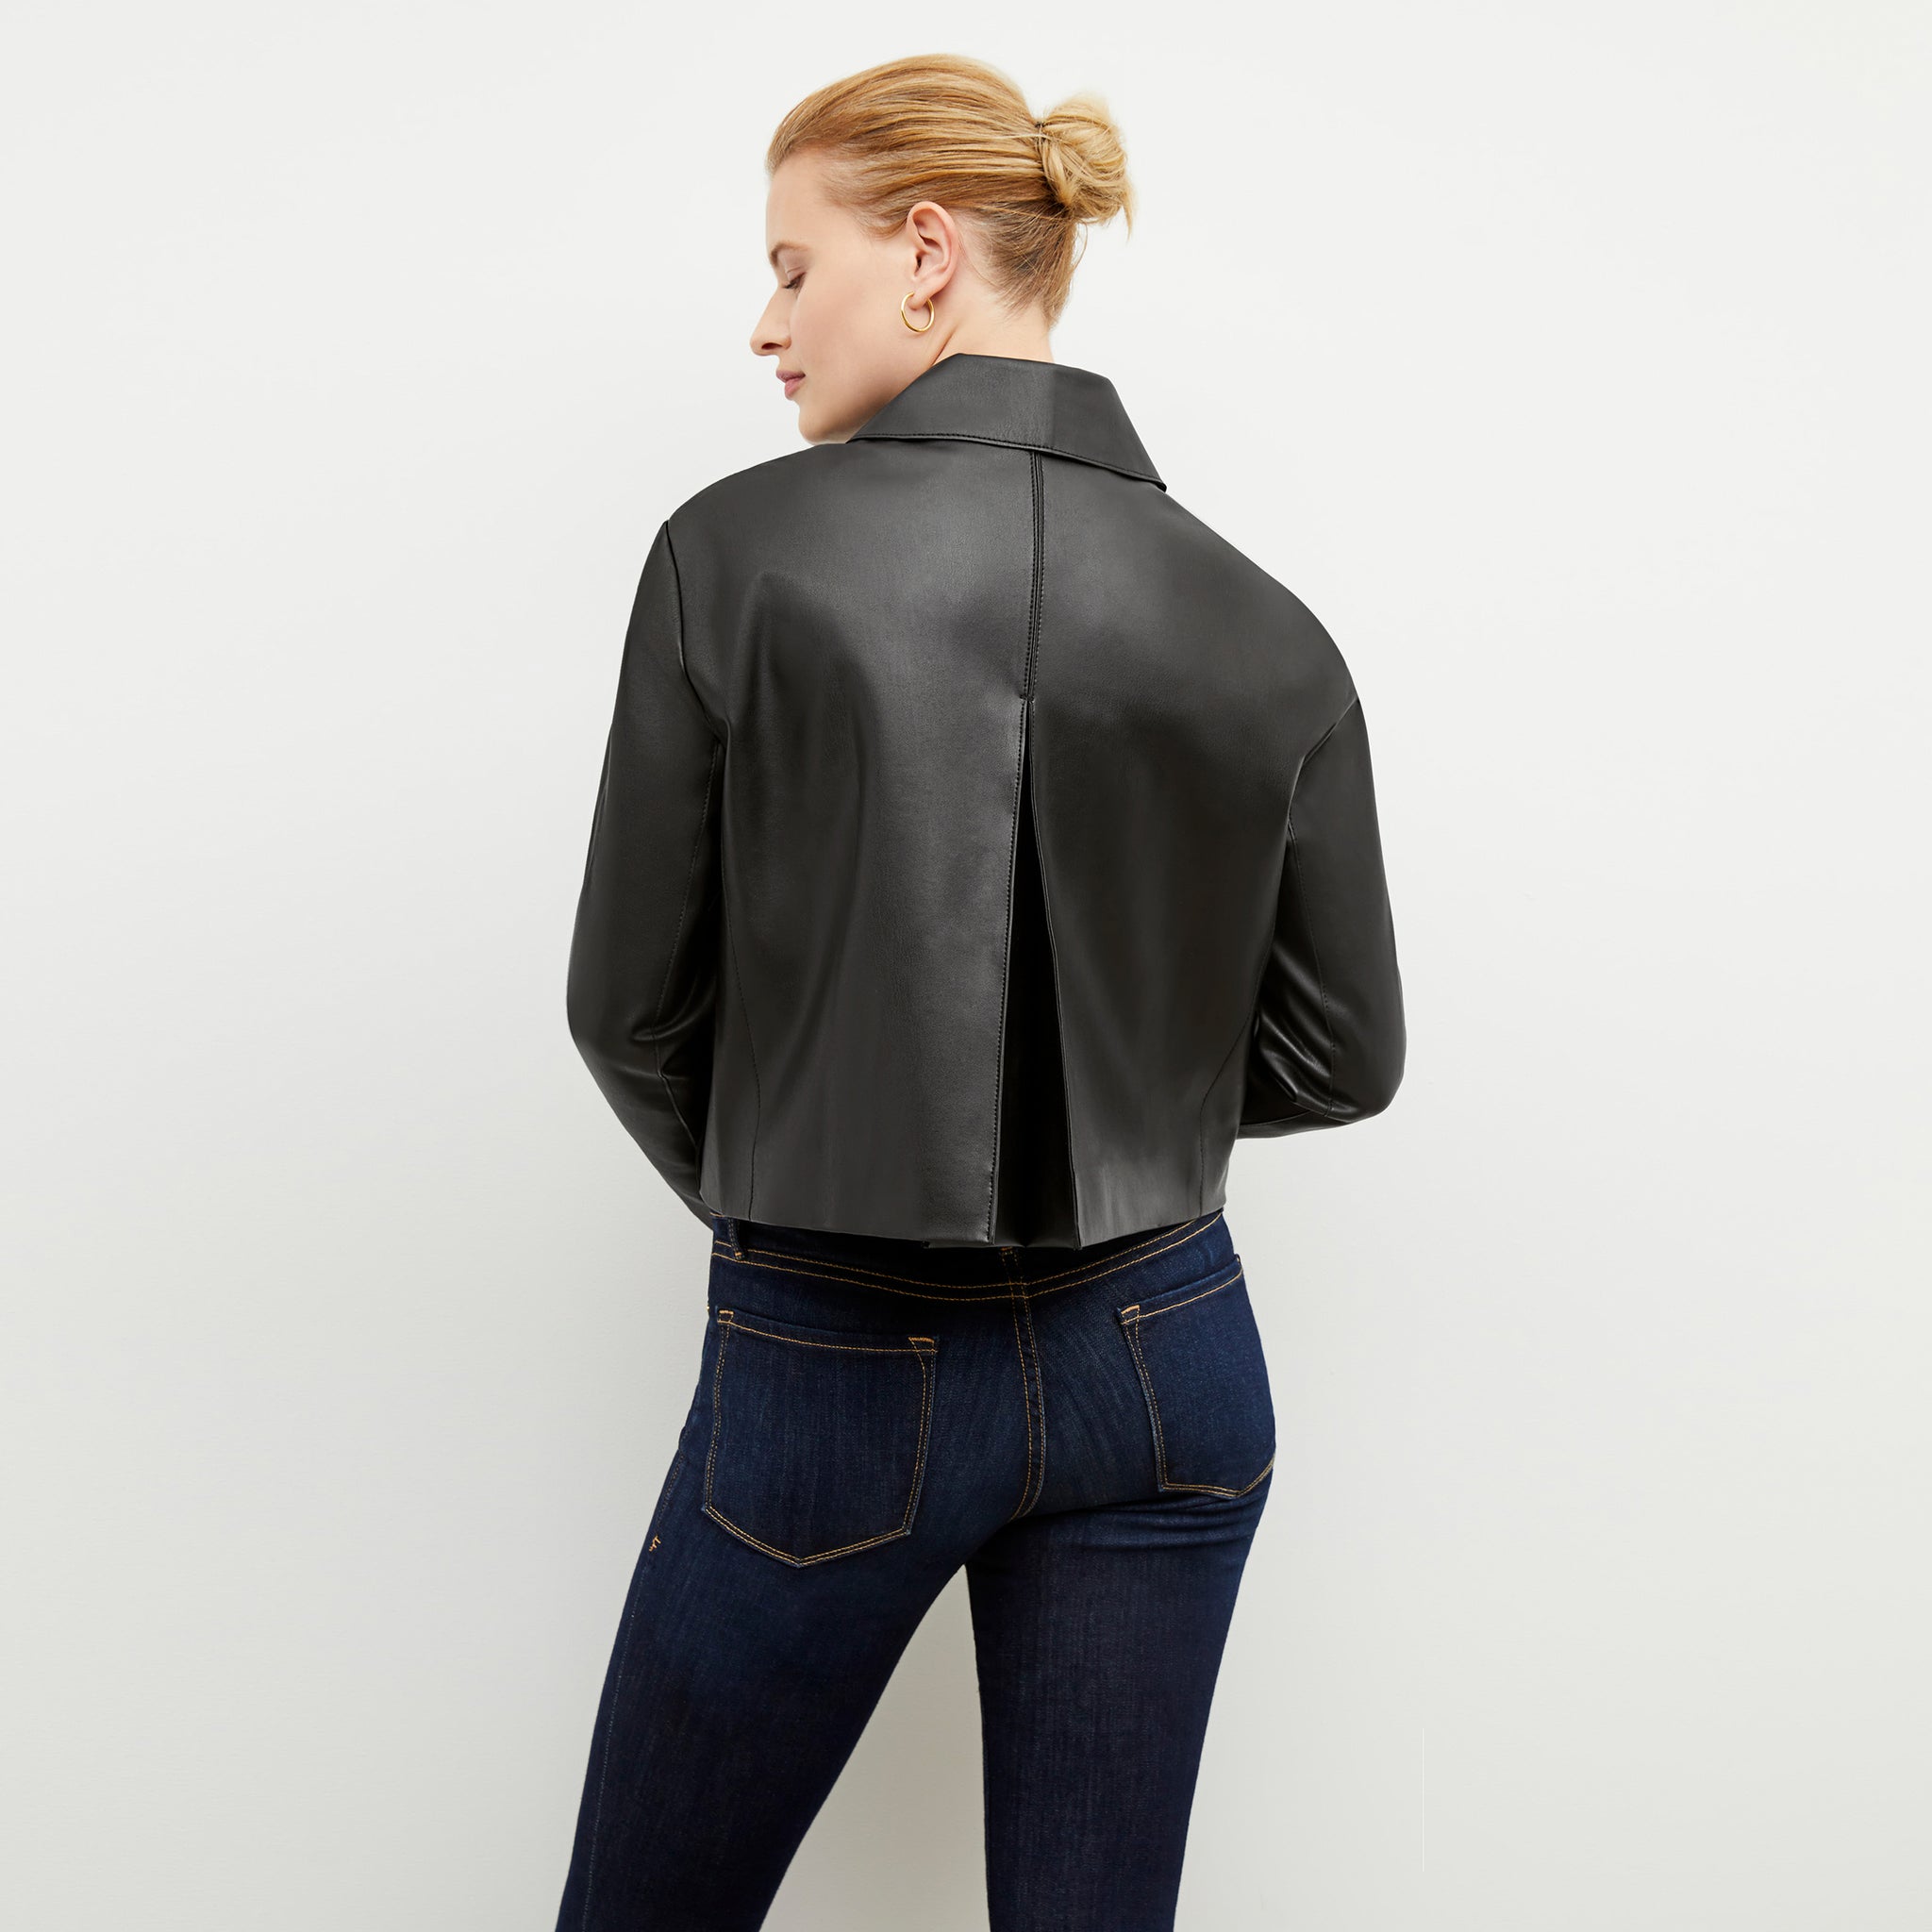 Back image of a woman wearing the nicky jacket in black